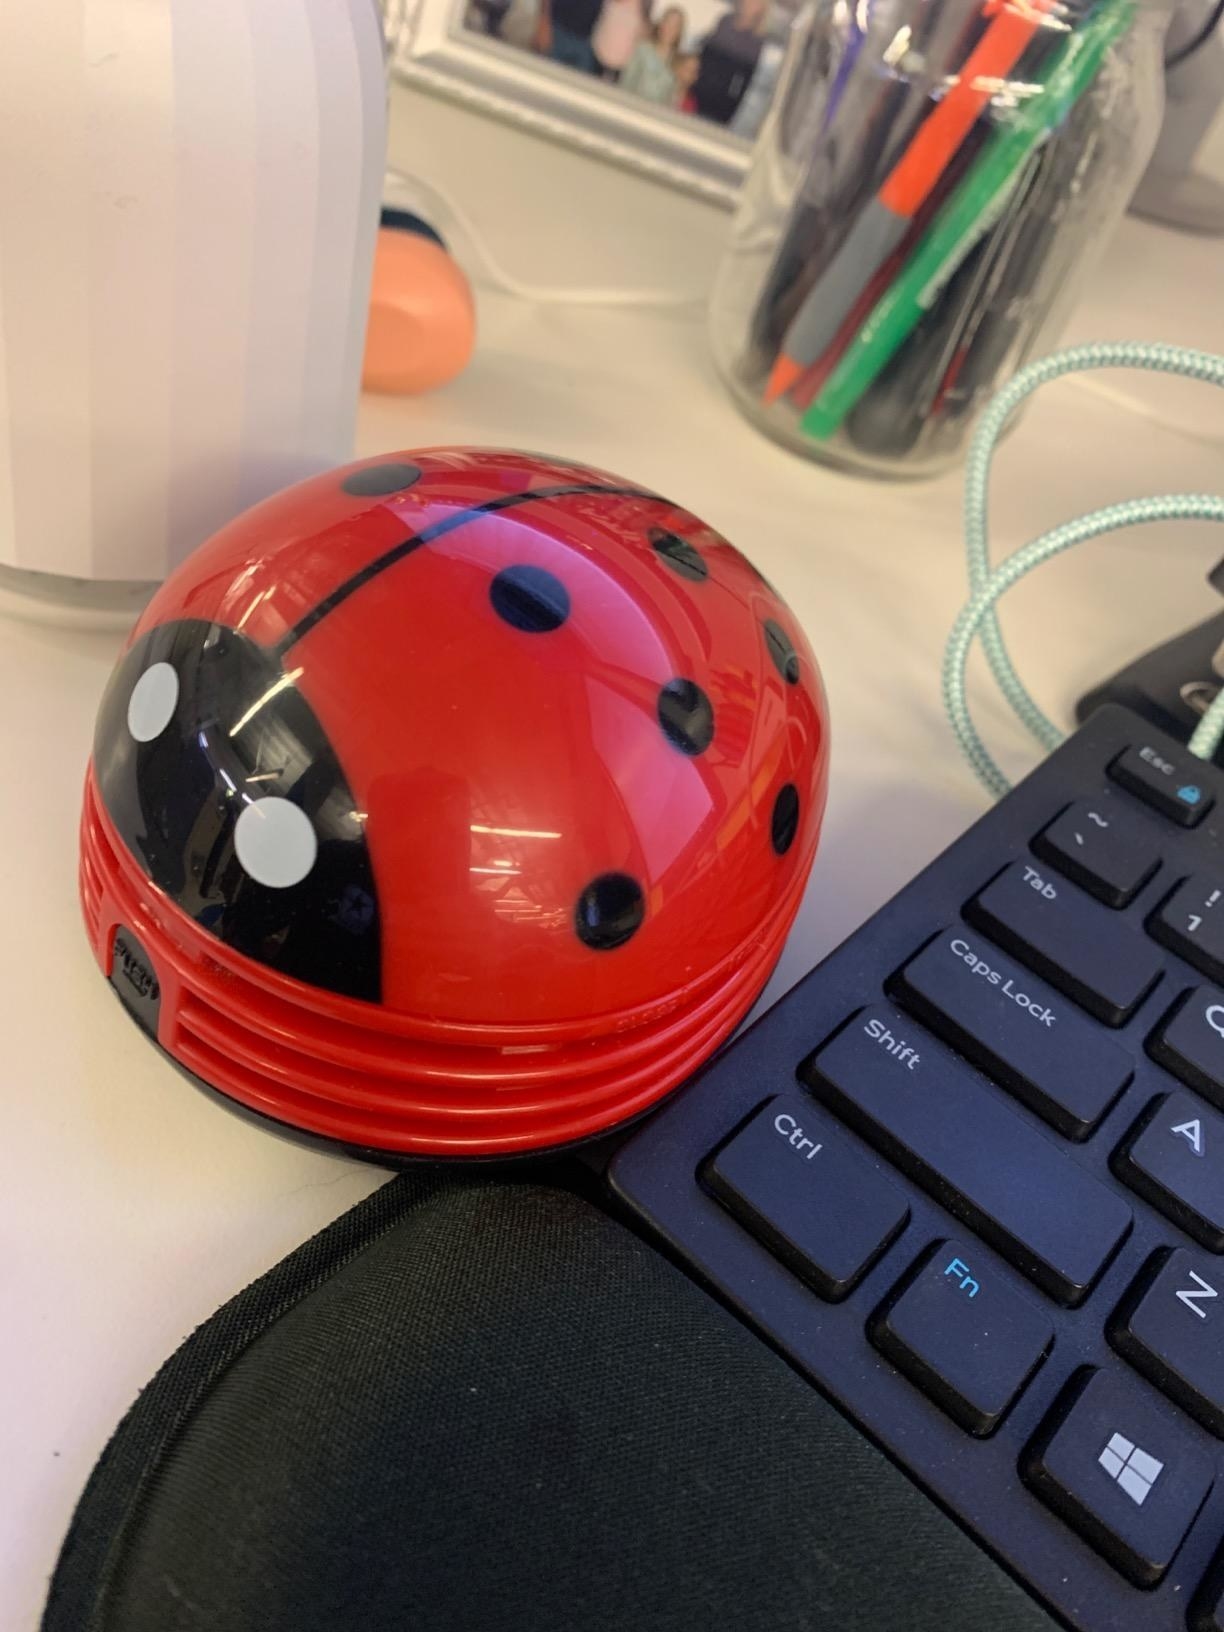 A reviewer's photo of the ladybug vacuum which is roughly the size of a computer mouse